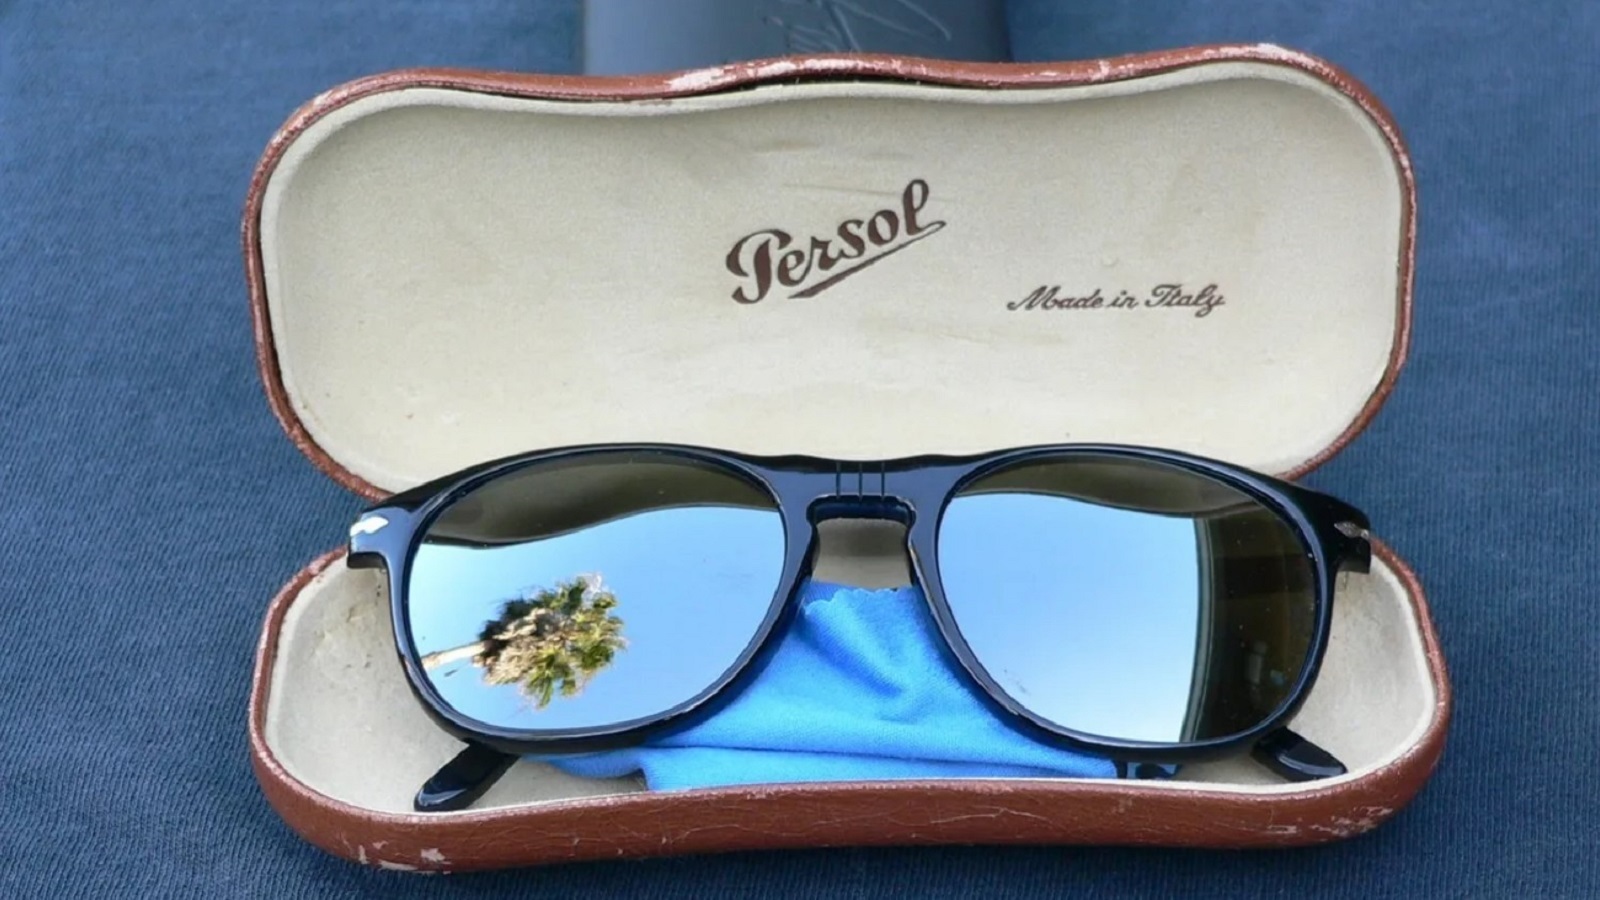 Persol Sunglasses Review: *Pros and Cons* Is It Worth to Buy?